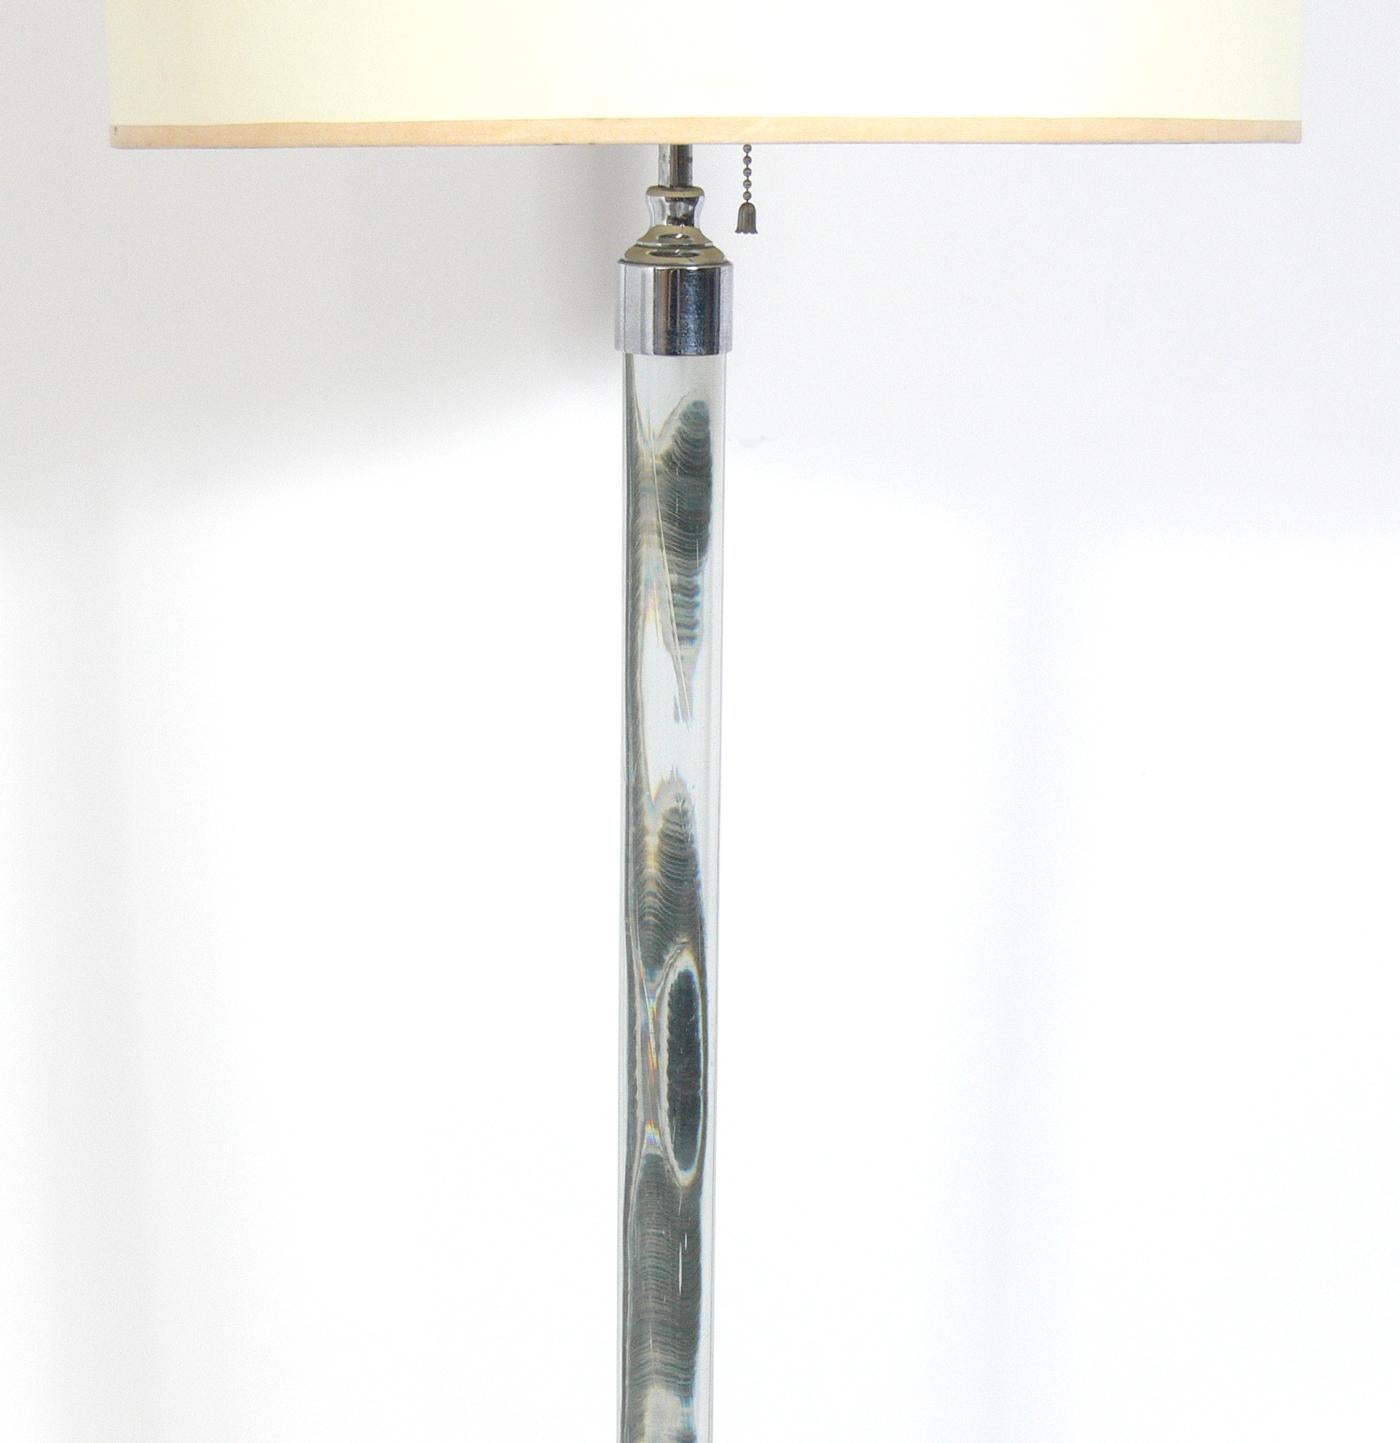 Selection of Glass Rod Floor Lamps, by Hansen, American, circa 1940s. These lamps are probably based on a Jean Michel Frank design, see last photo for the Frank design. These thick glass rod lamps were a favourite choice of Samuel Marx and are used